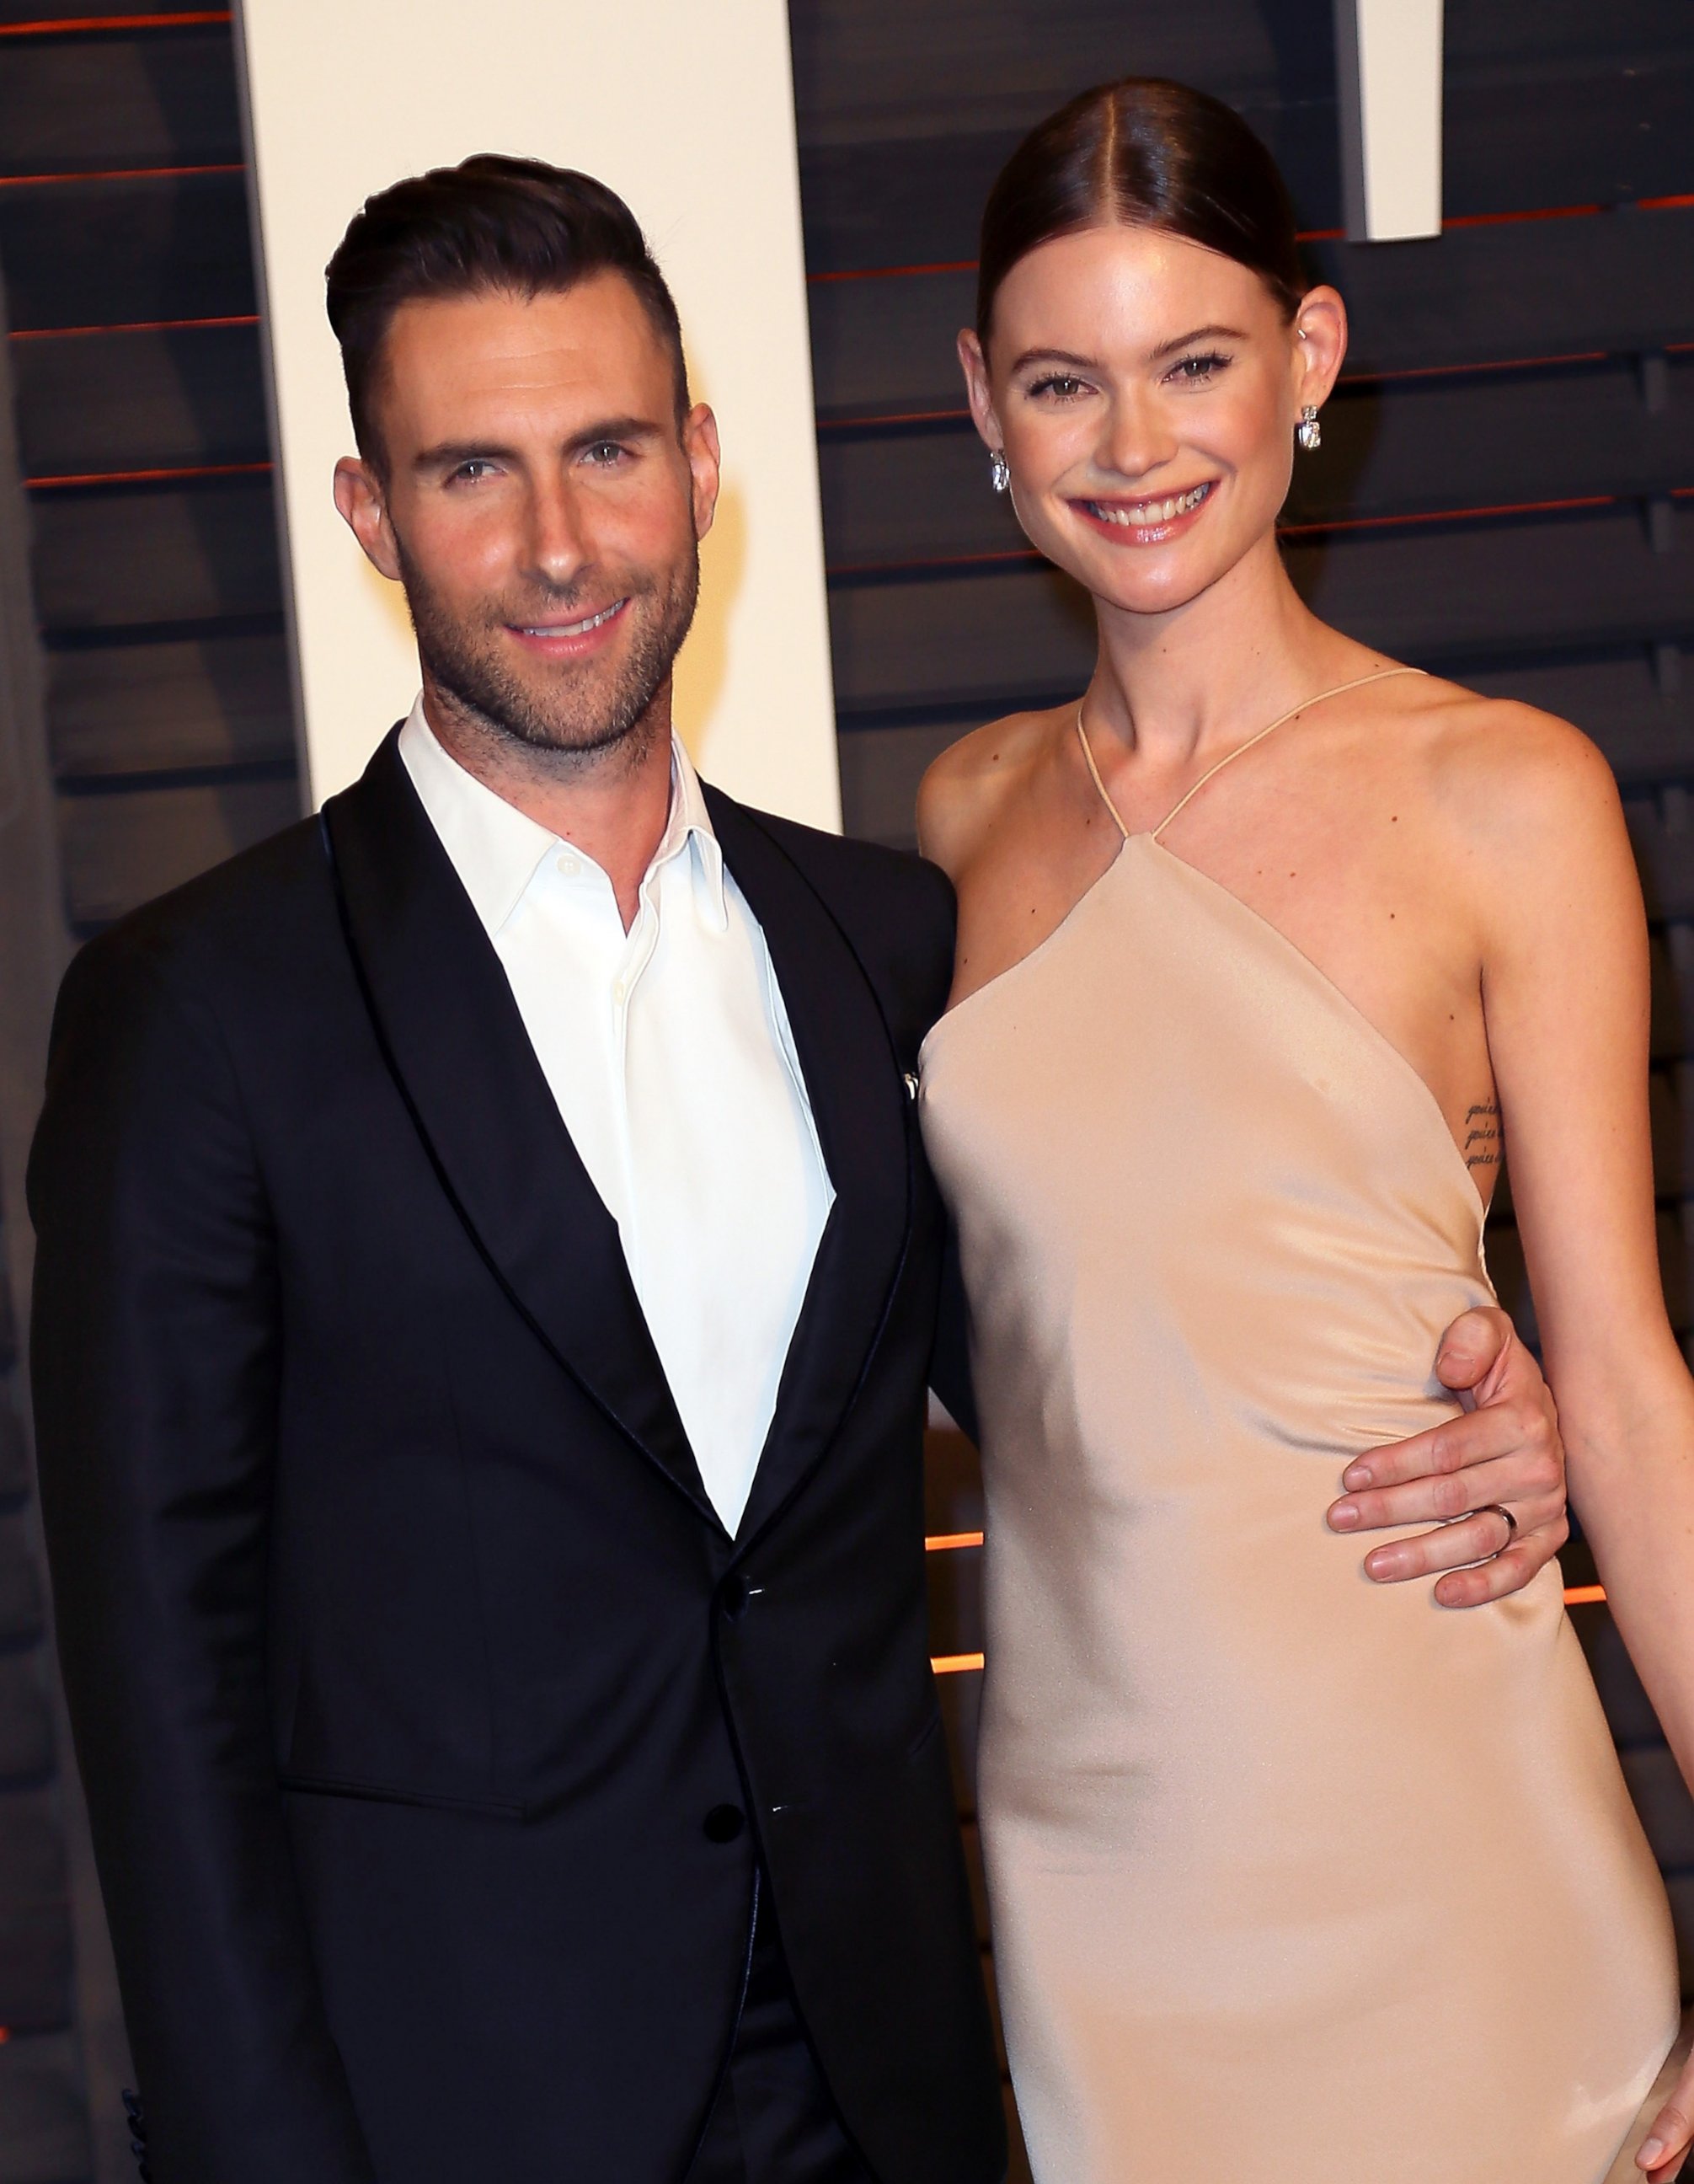 PHOTO: Recording artist Adam Levine and wife model Behati Prinsloo attend the 2015 Vanity Fair Oscar Party hosted by Graydon Carter, Feb. 22, 2015 in Beverly Hills, Calif. 